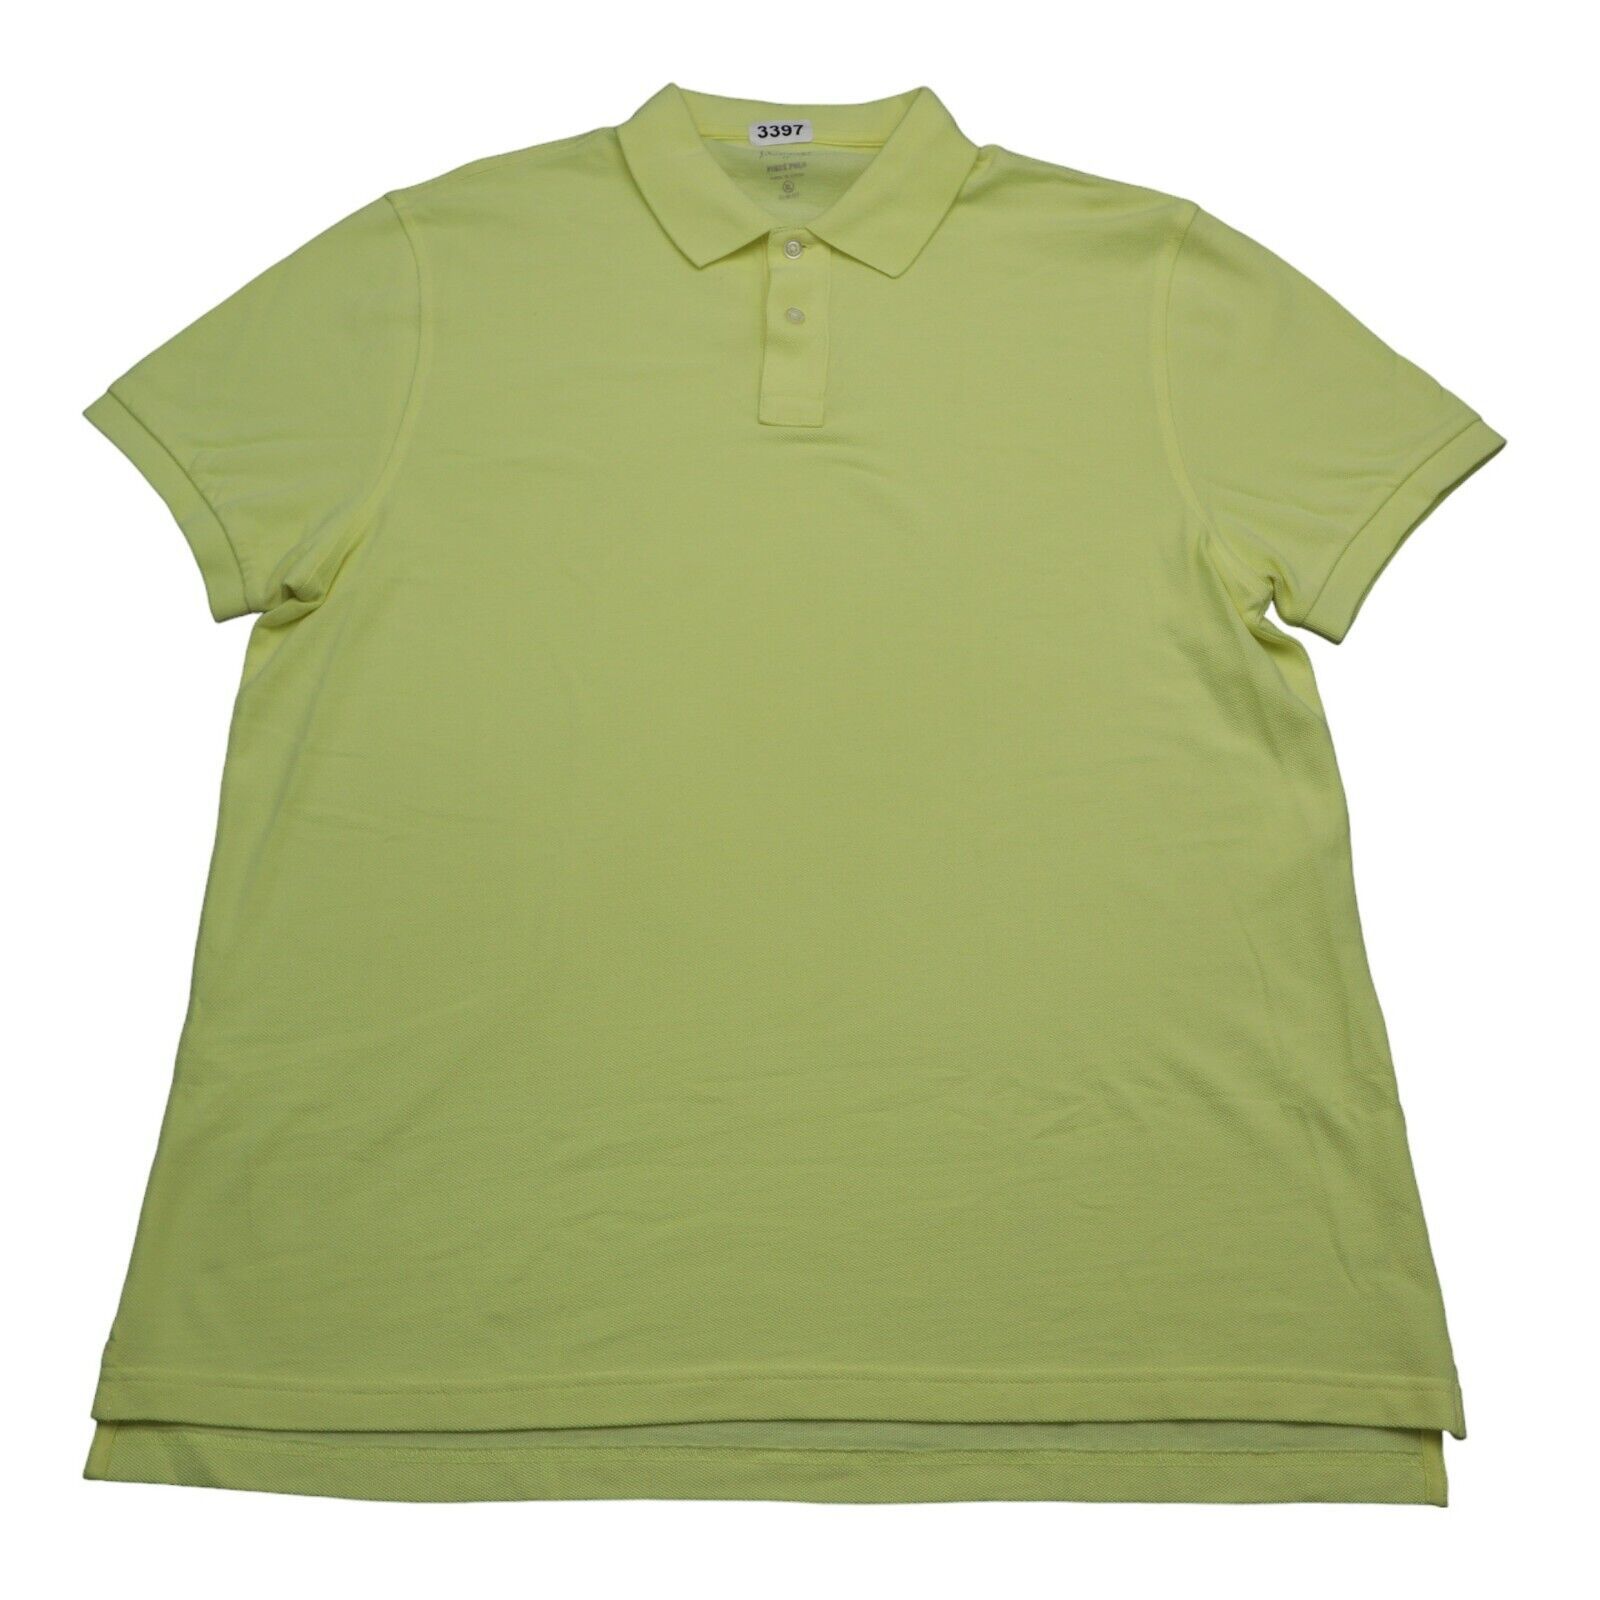 Primary image for J Crew Polo Shirt Mens XL Yellow Slim Fit Golf Pique Preppy Workwear Office